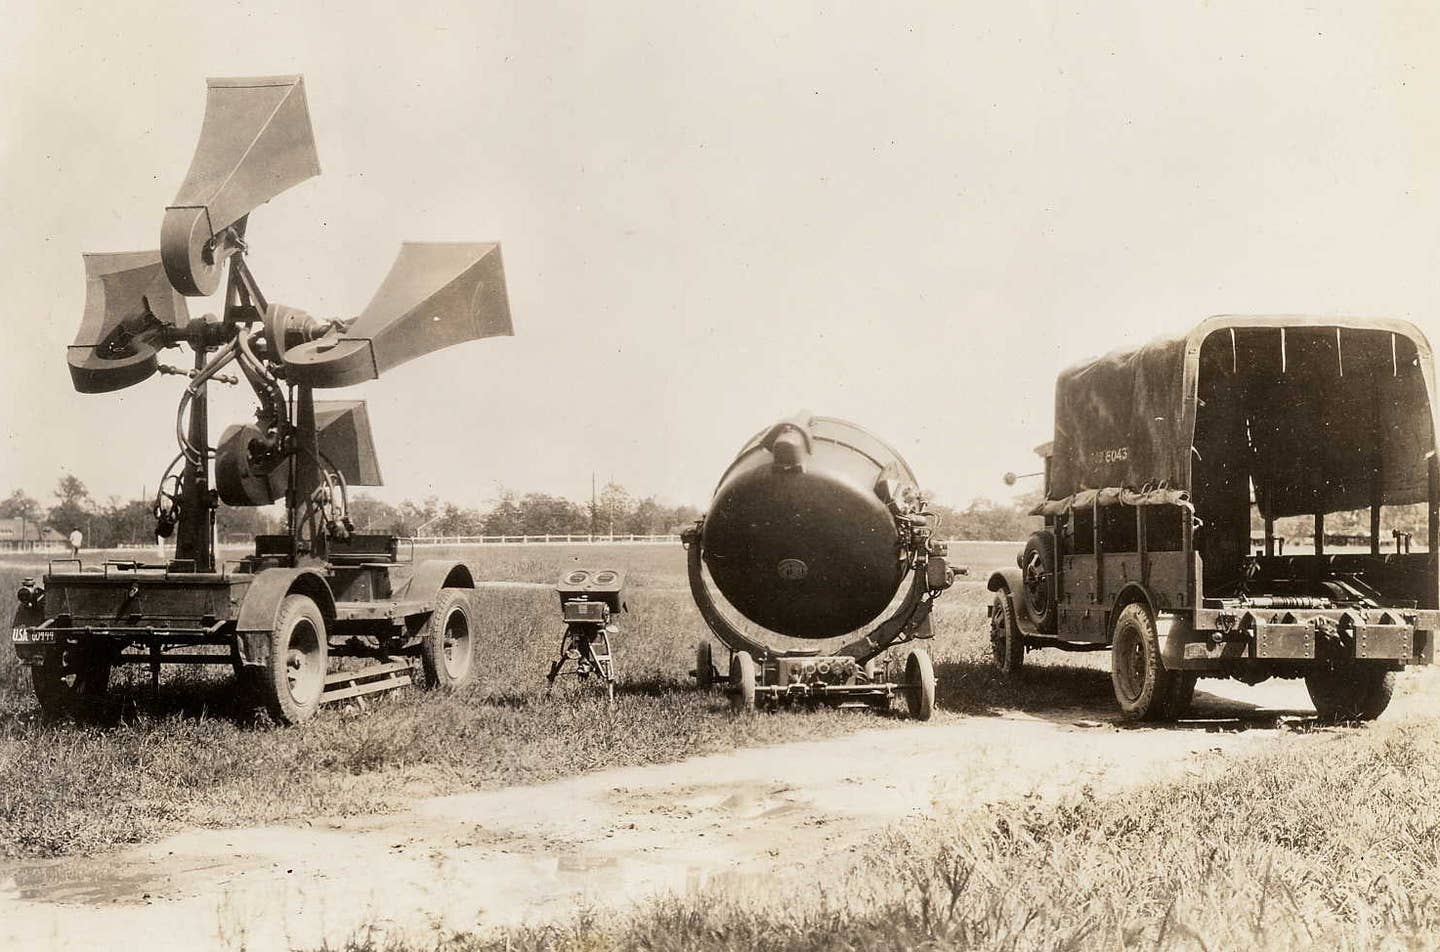 A U.S. Coast Artillery Corps aircraft sound locator system, at left, as well as a searchlight and transport truck, somewhere in the United States in 1932. <em>U.S. Coast Artillery Corps</em>